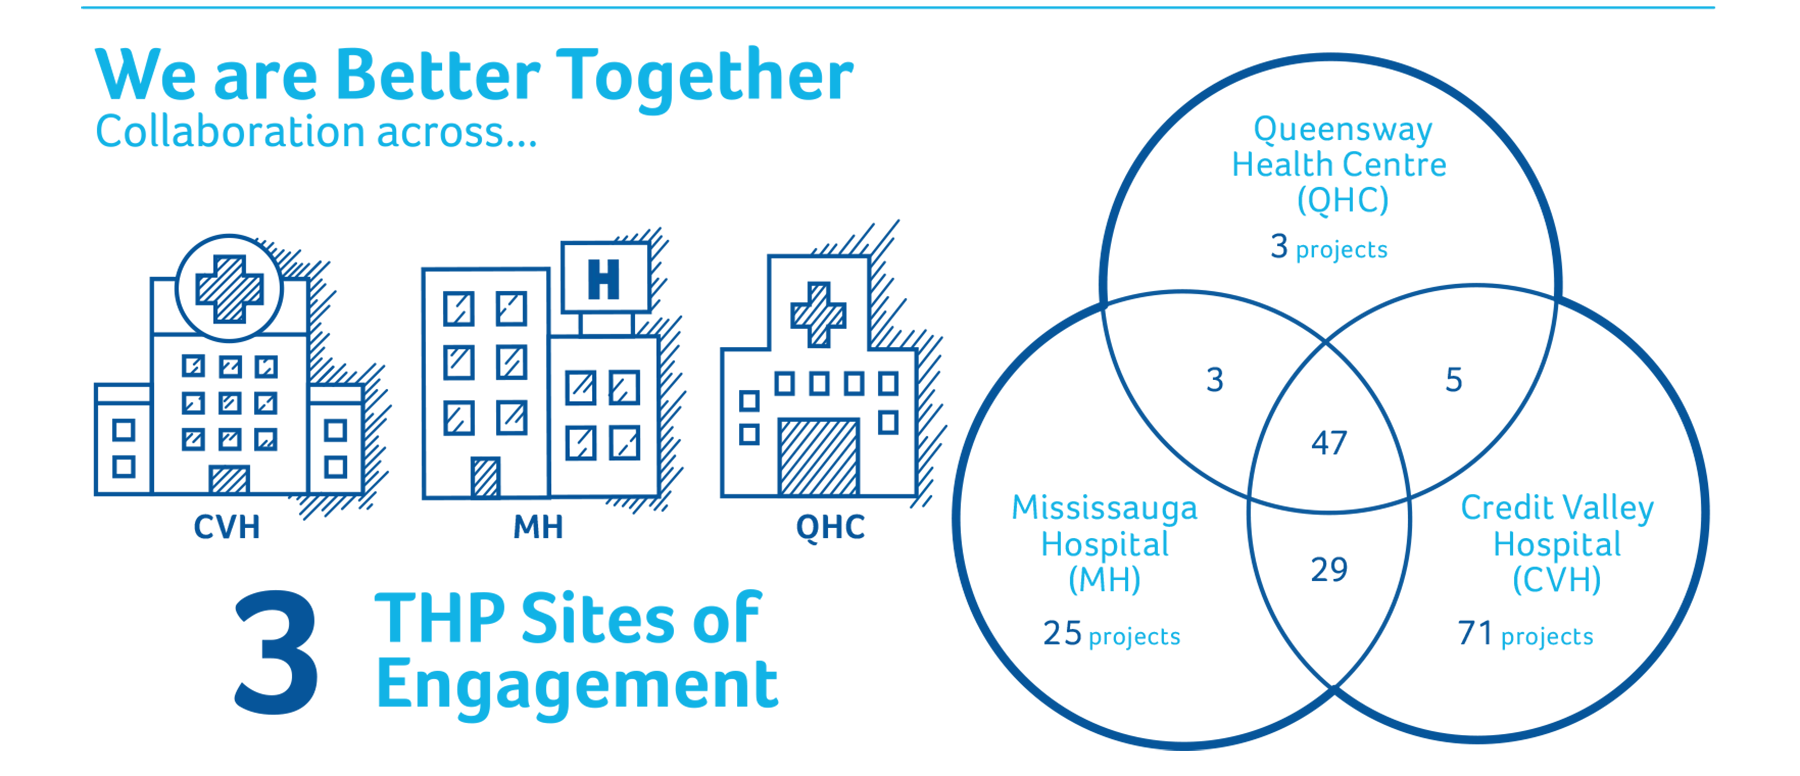 3 Sites of Engagement: Mississauga Hospital: 25 Projects, Credit Valley Hospital: 71 projects, Queensway Health Centre: 3 Projects.